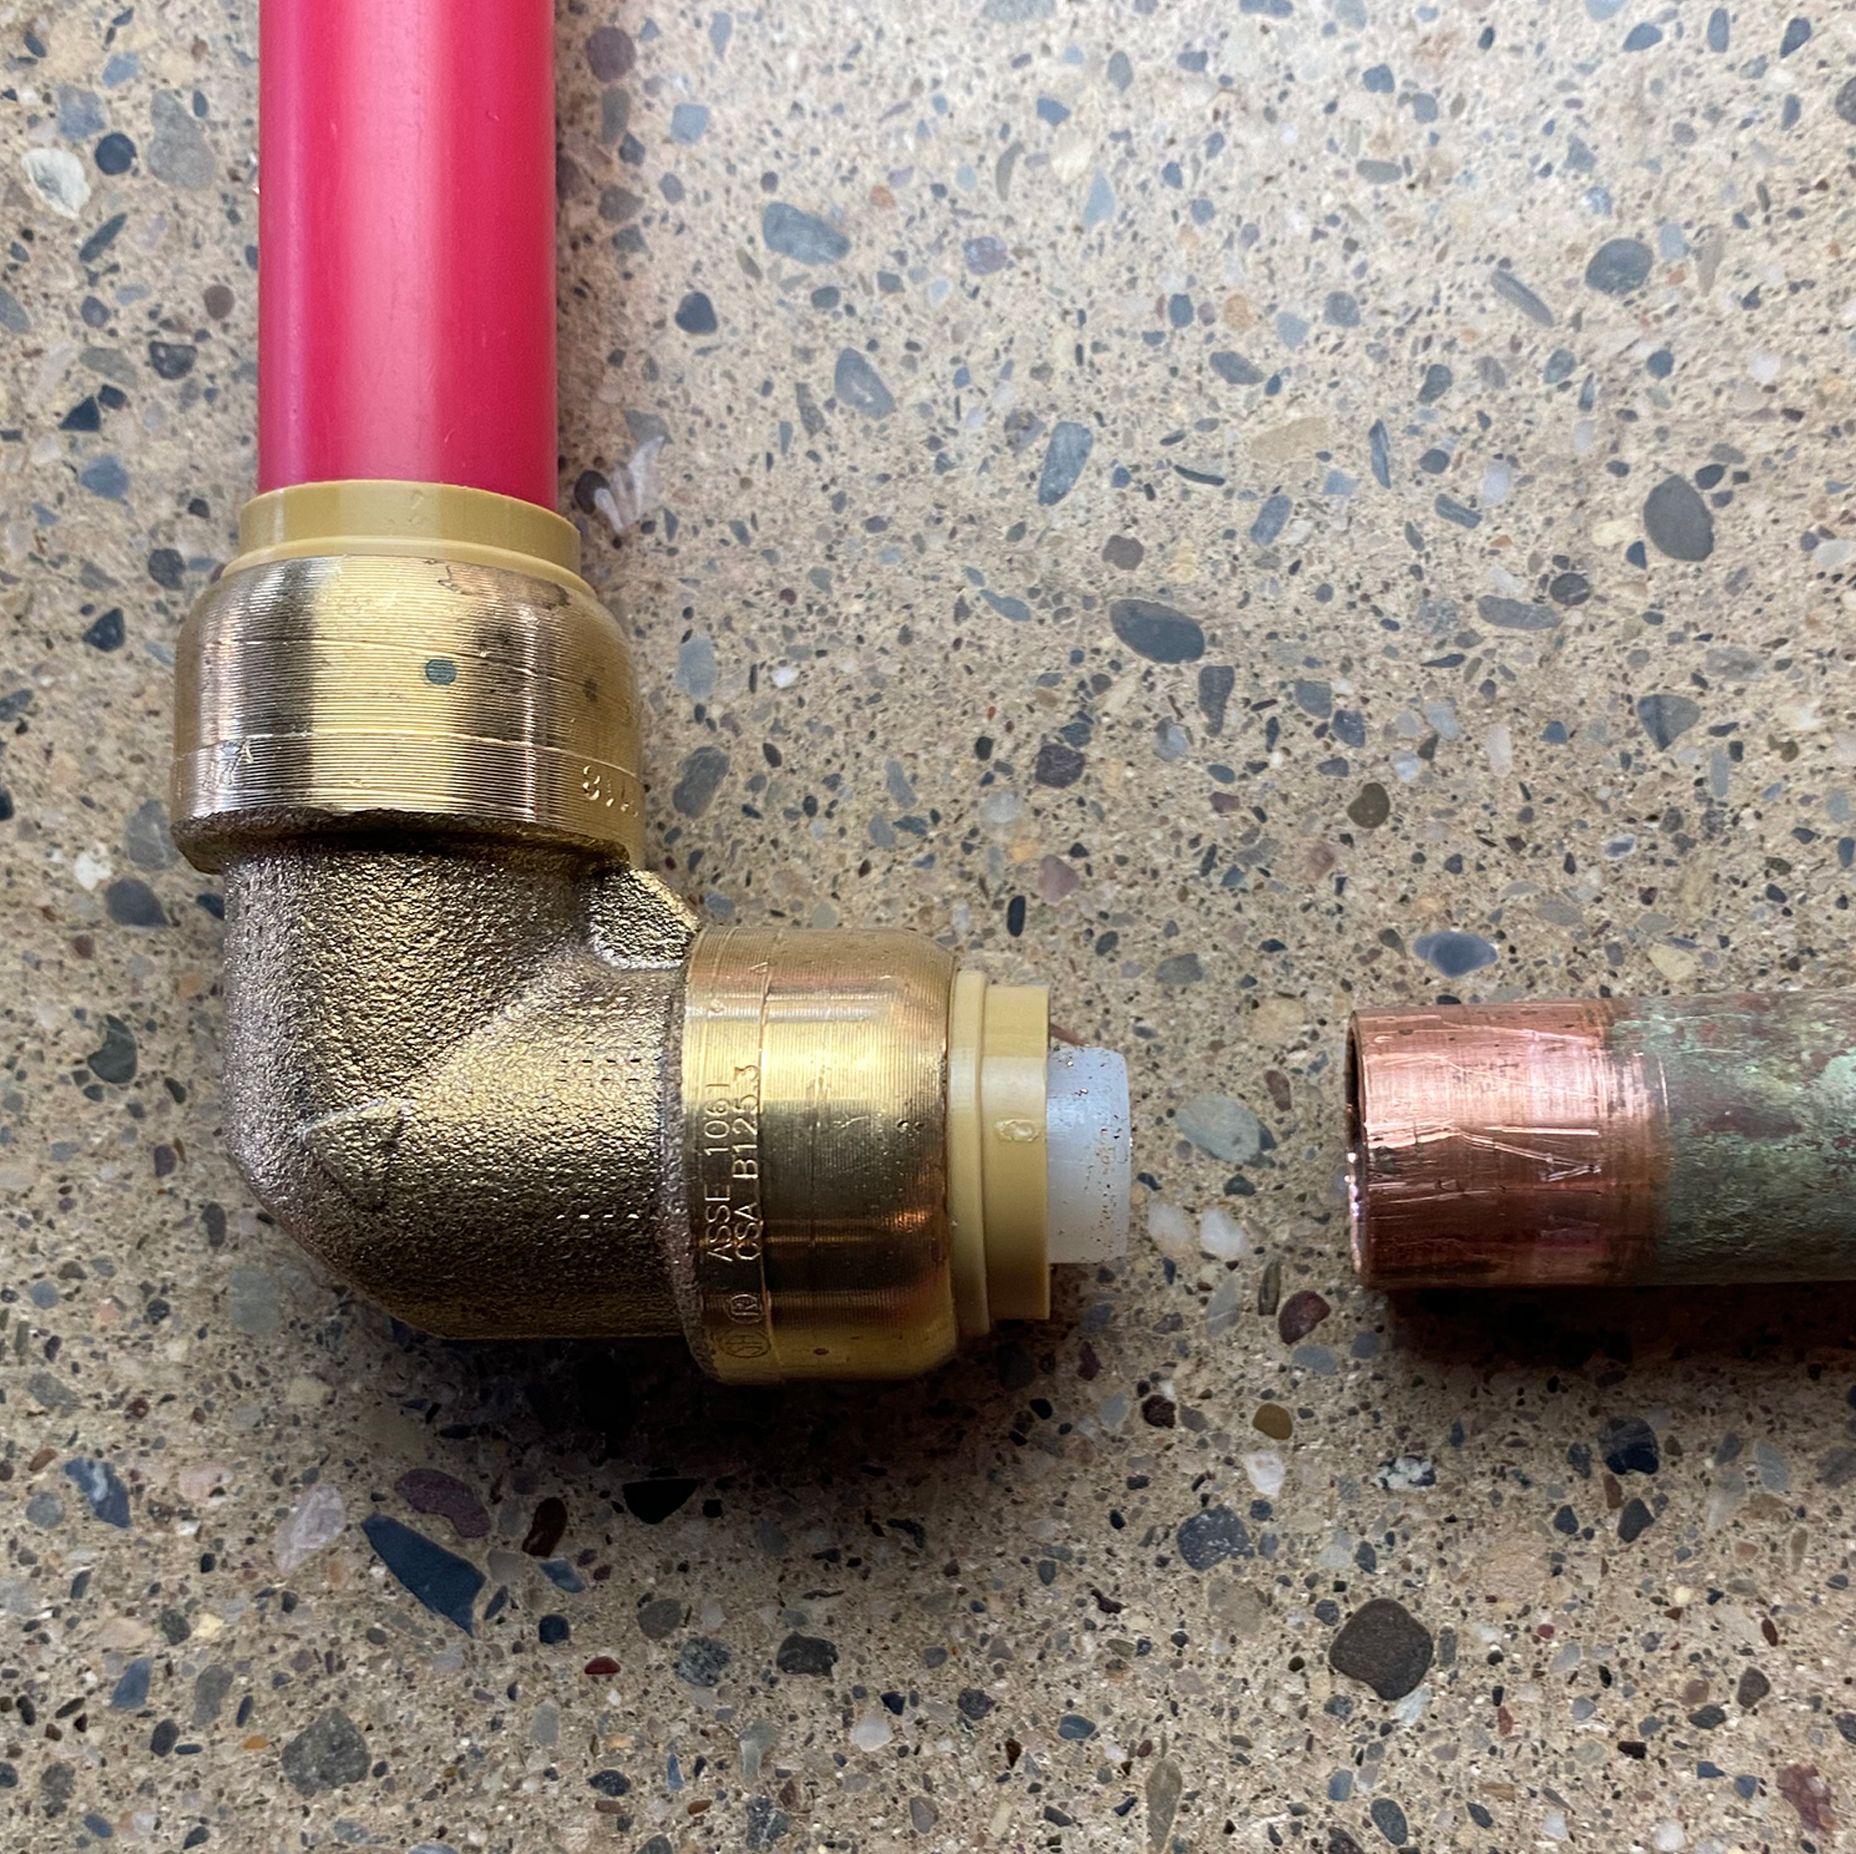 SharkBite Fittings Made Me Believe There Is Such A Thing As An Easy Plumbing Repair